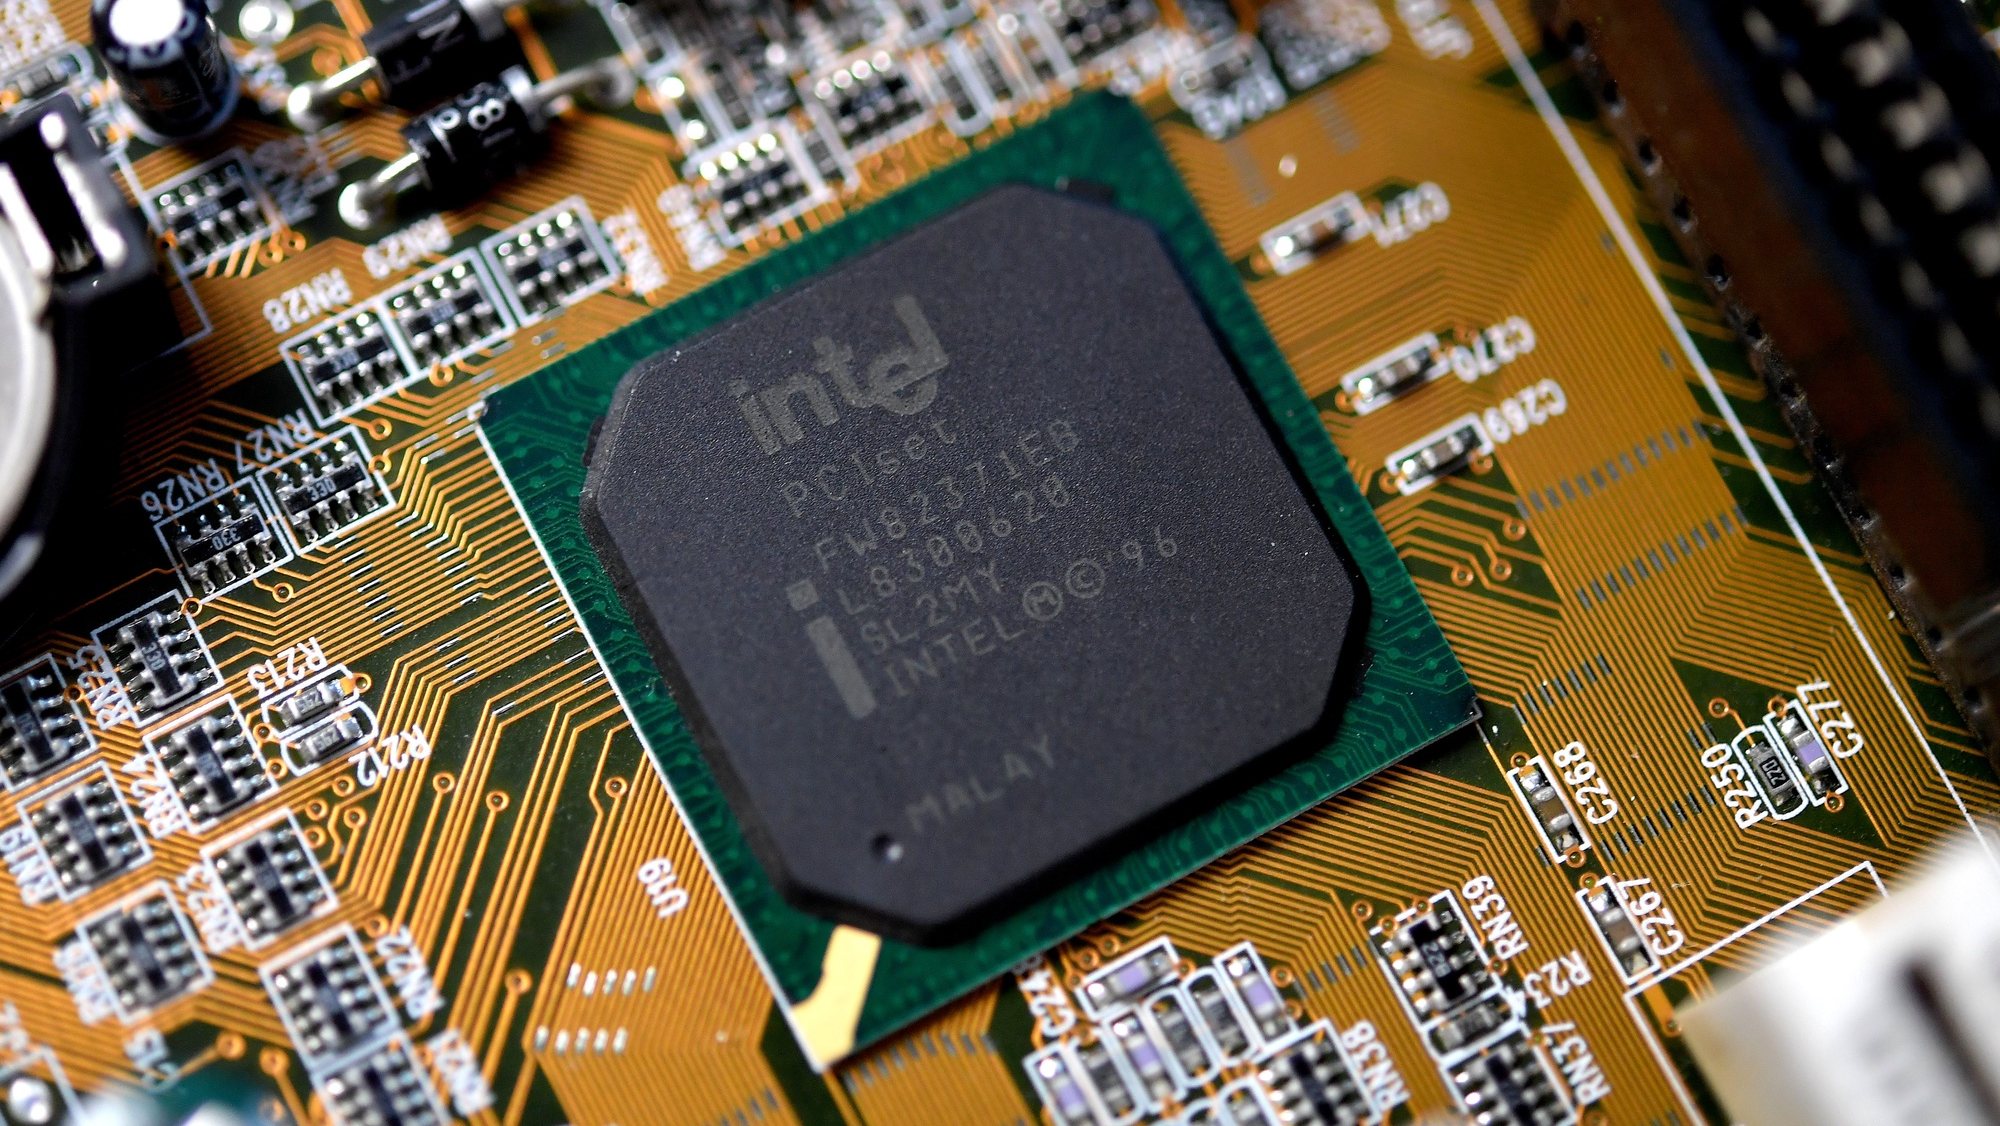 epa06416768 A close-up photo showing an Intel computer circuit board displayed in Duesseldorf, Germany, 04 January 2018. Reports on 04 January 2018 state technology companies are rushing to fix two considerable flaws in popular computer chips manufactured by Intel, AMD and ARM. Security researchers at Google, working together with specialists in several countries, have discovered two major security threats in processors manufactured by AMD, Intel and ARM. The flaws could help attackers to gain access to sensitive information such as banking information and passwords. It is not known if the boards and chips pictured contain the security vulnerability.  EPA/SASCHA STEINBACH